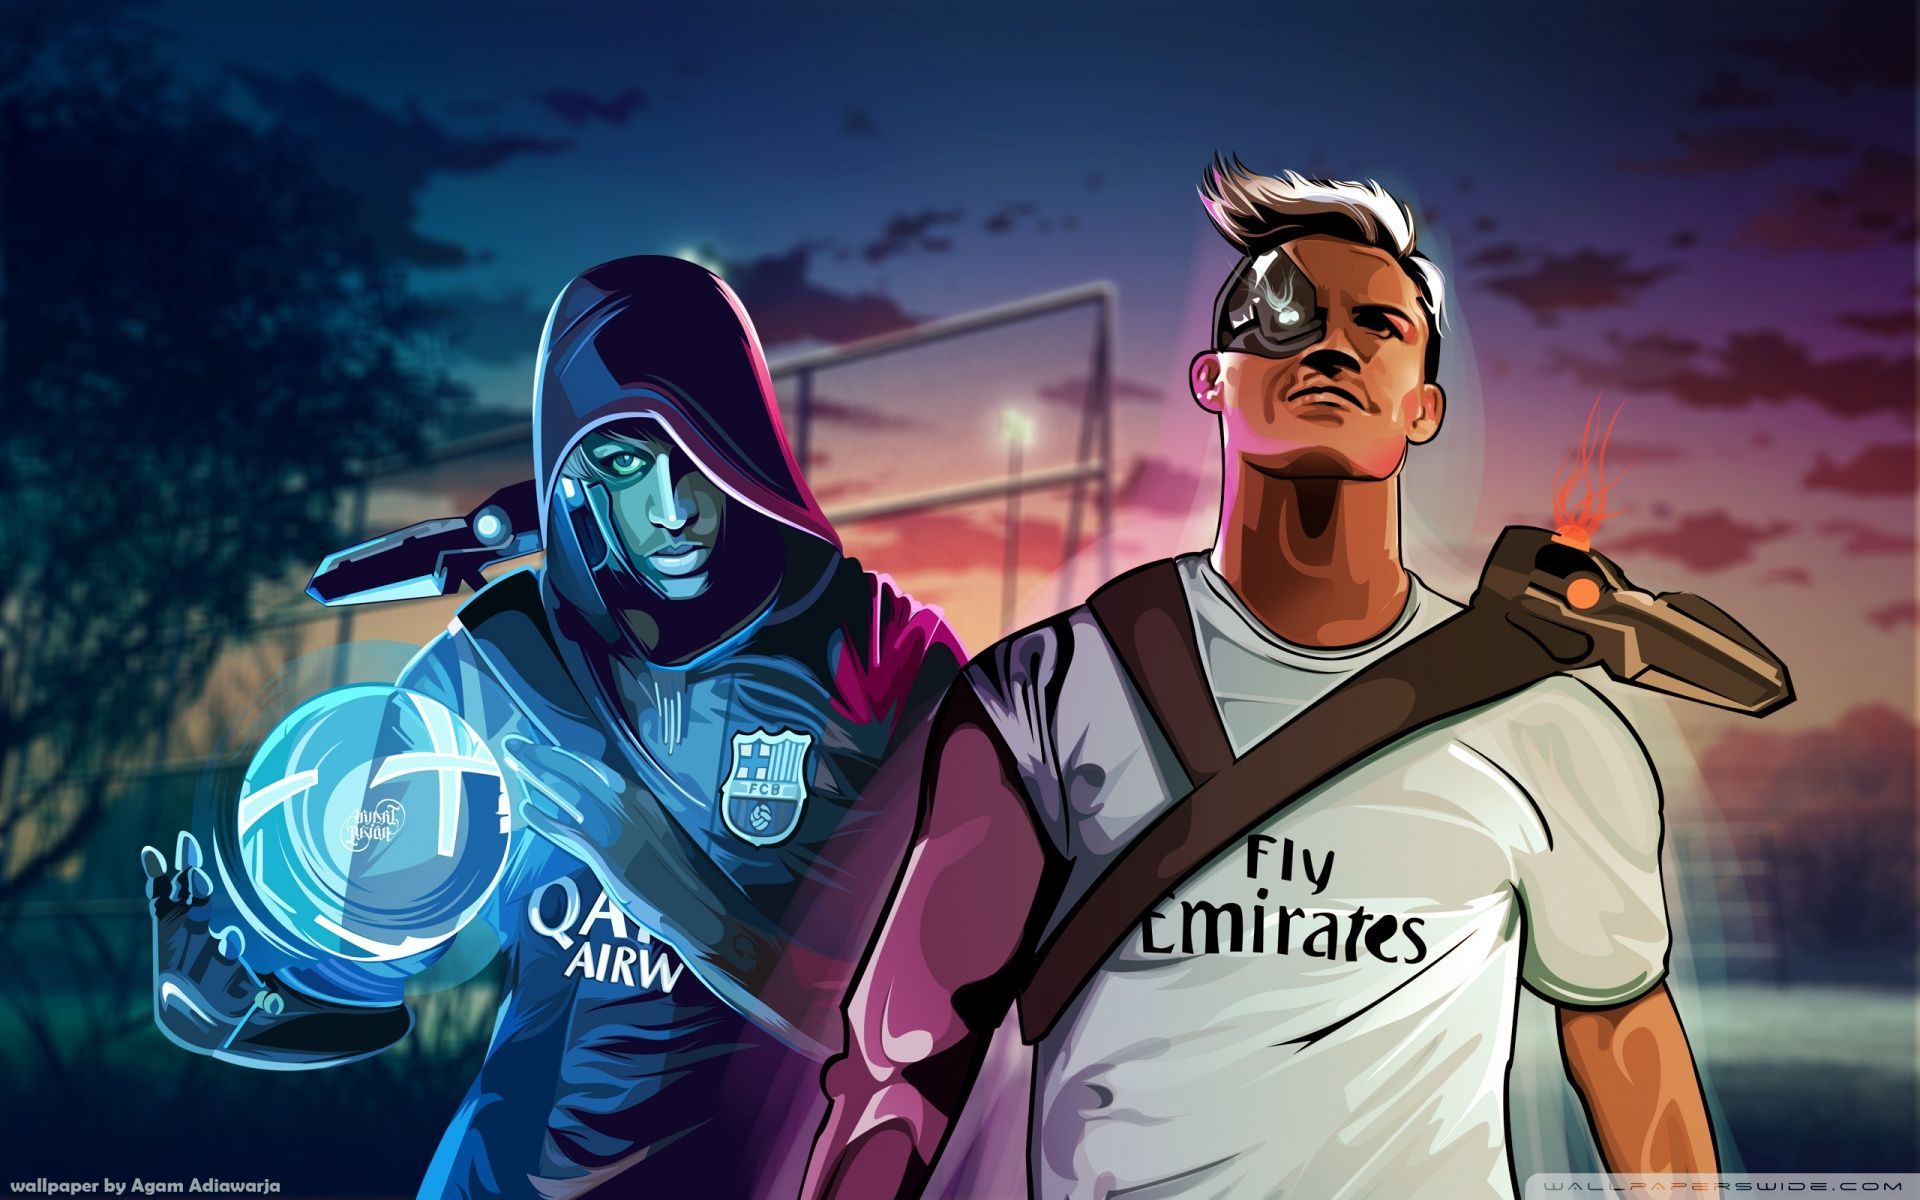 Amazing Soccer Wallpapers on WallpaperDog